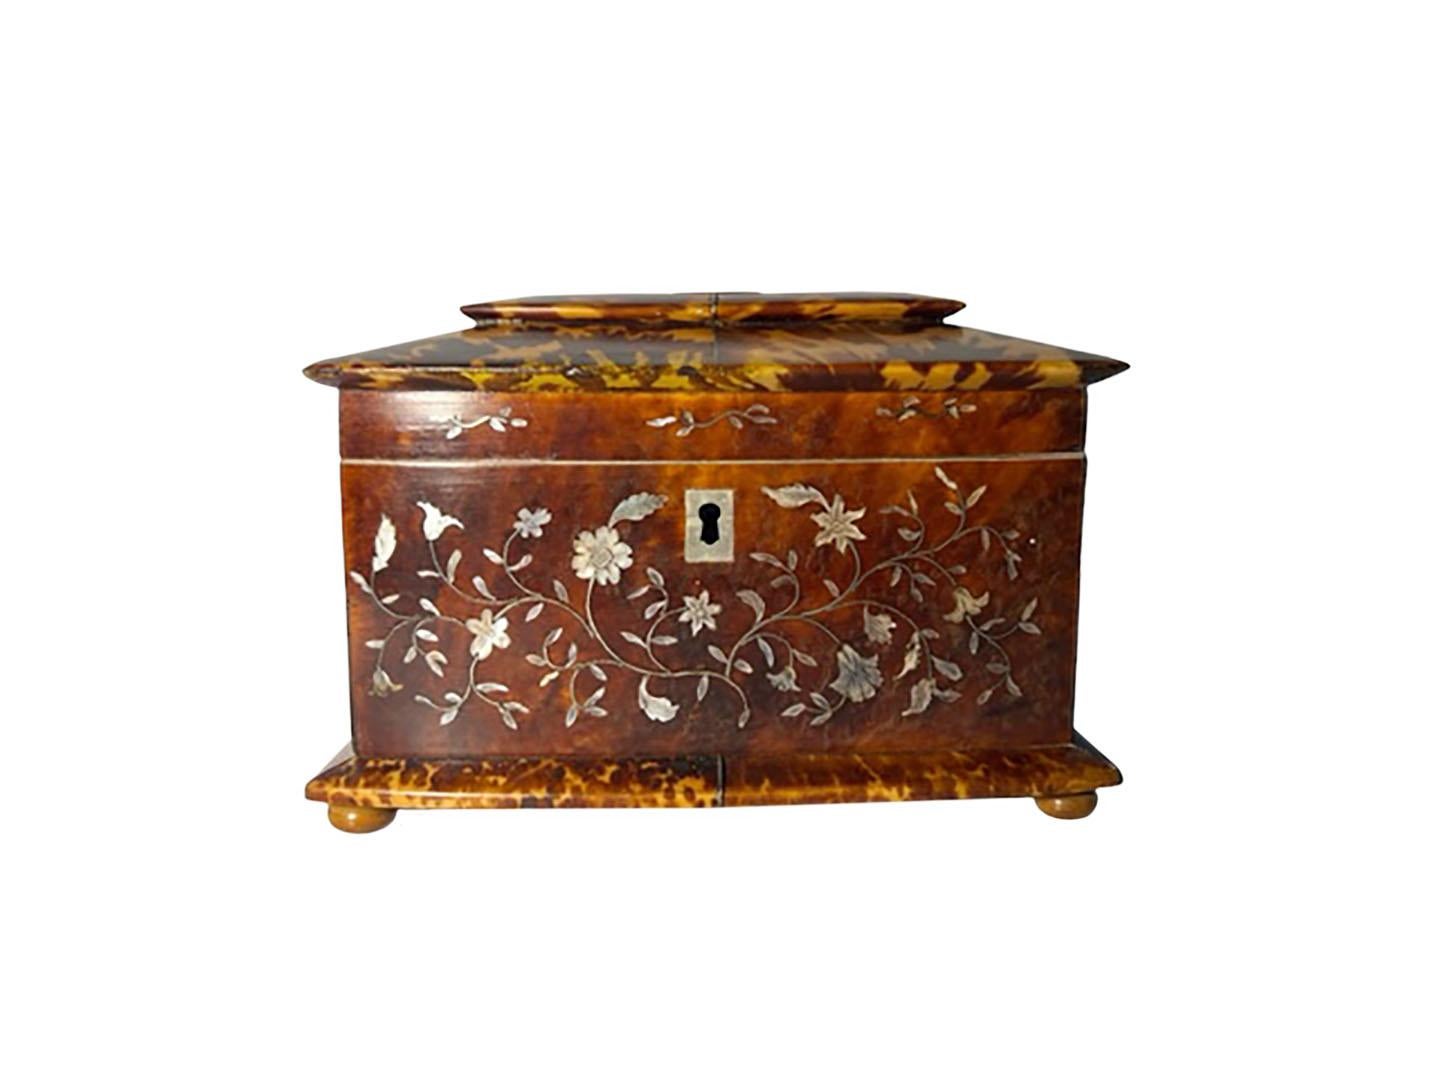 A lovely bow front tortoiseshell tea caddy inlaid with mother of pearl flowers and topped with a silver badge. English, circa 1870.